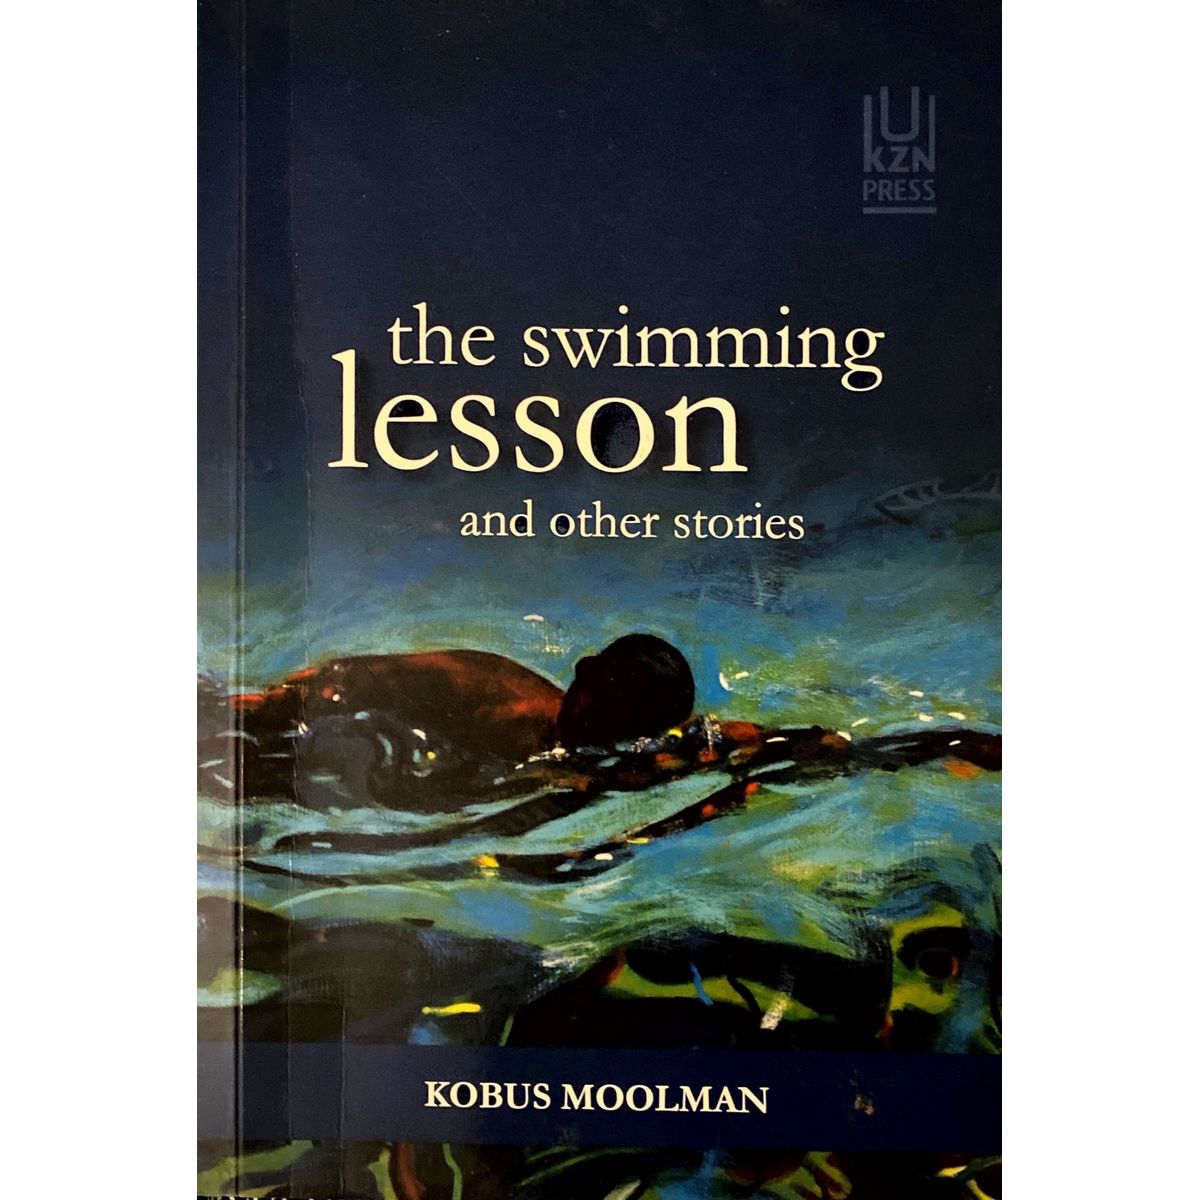 ISBN: 9781869143626 / 1869143620 - The Swimming Lesson and Other Stories by Kobus Moolman [2017]